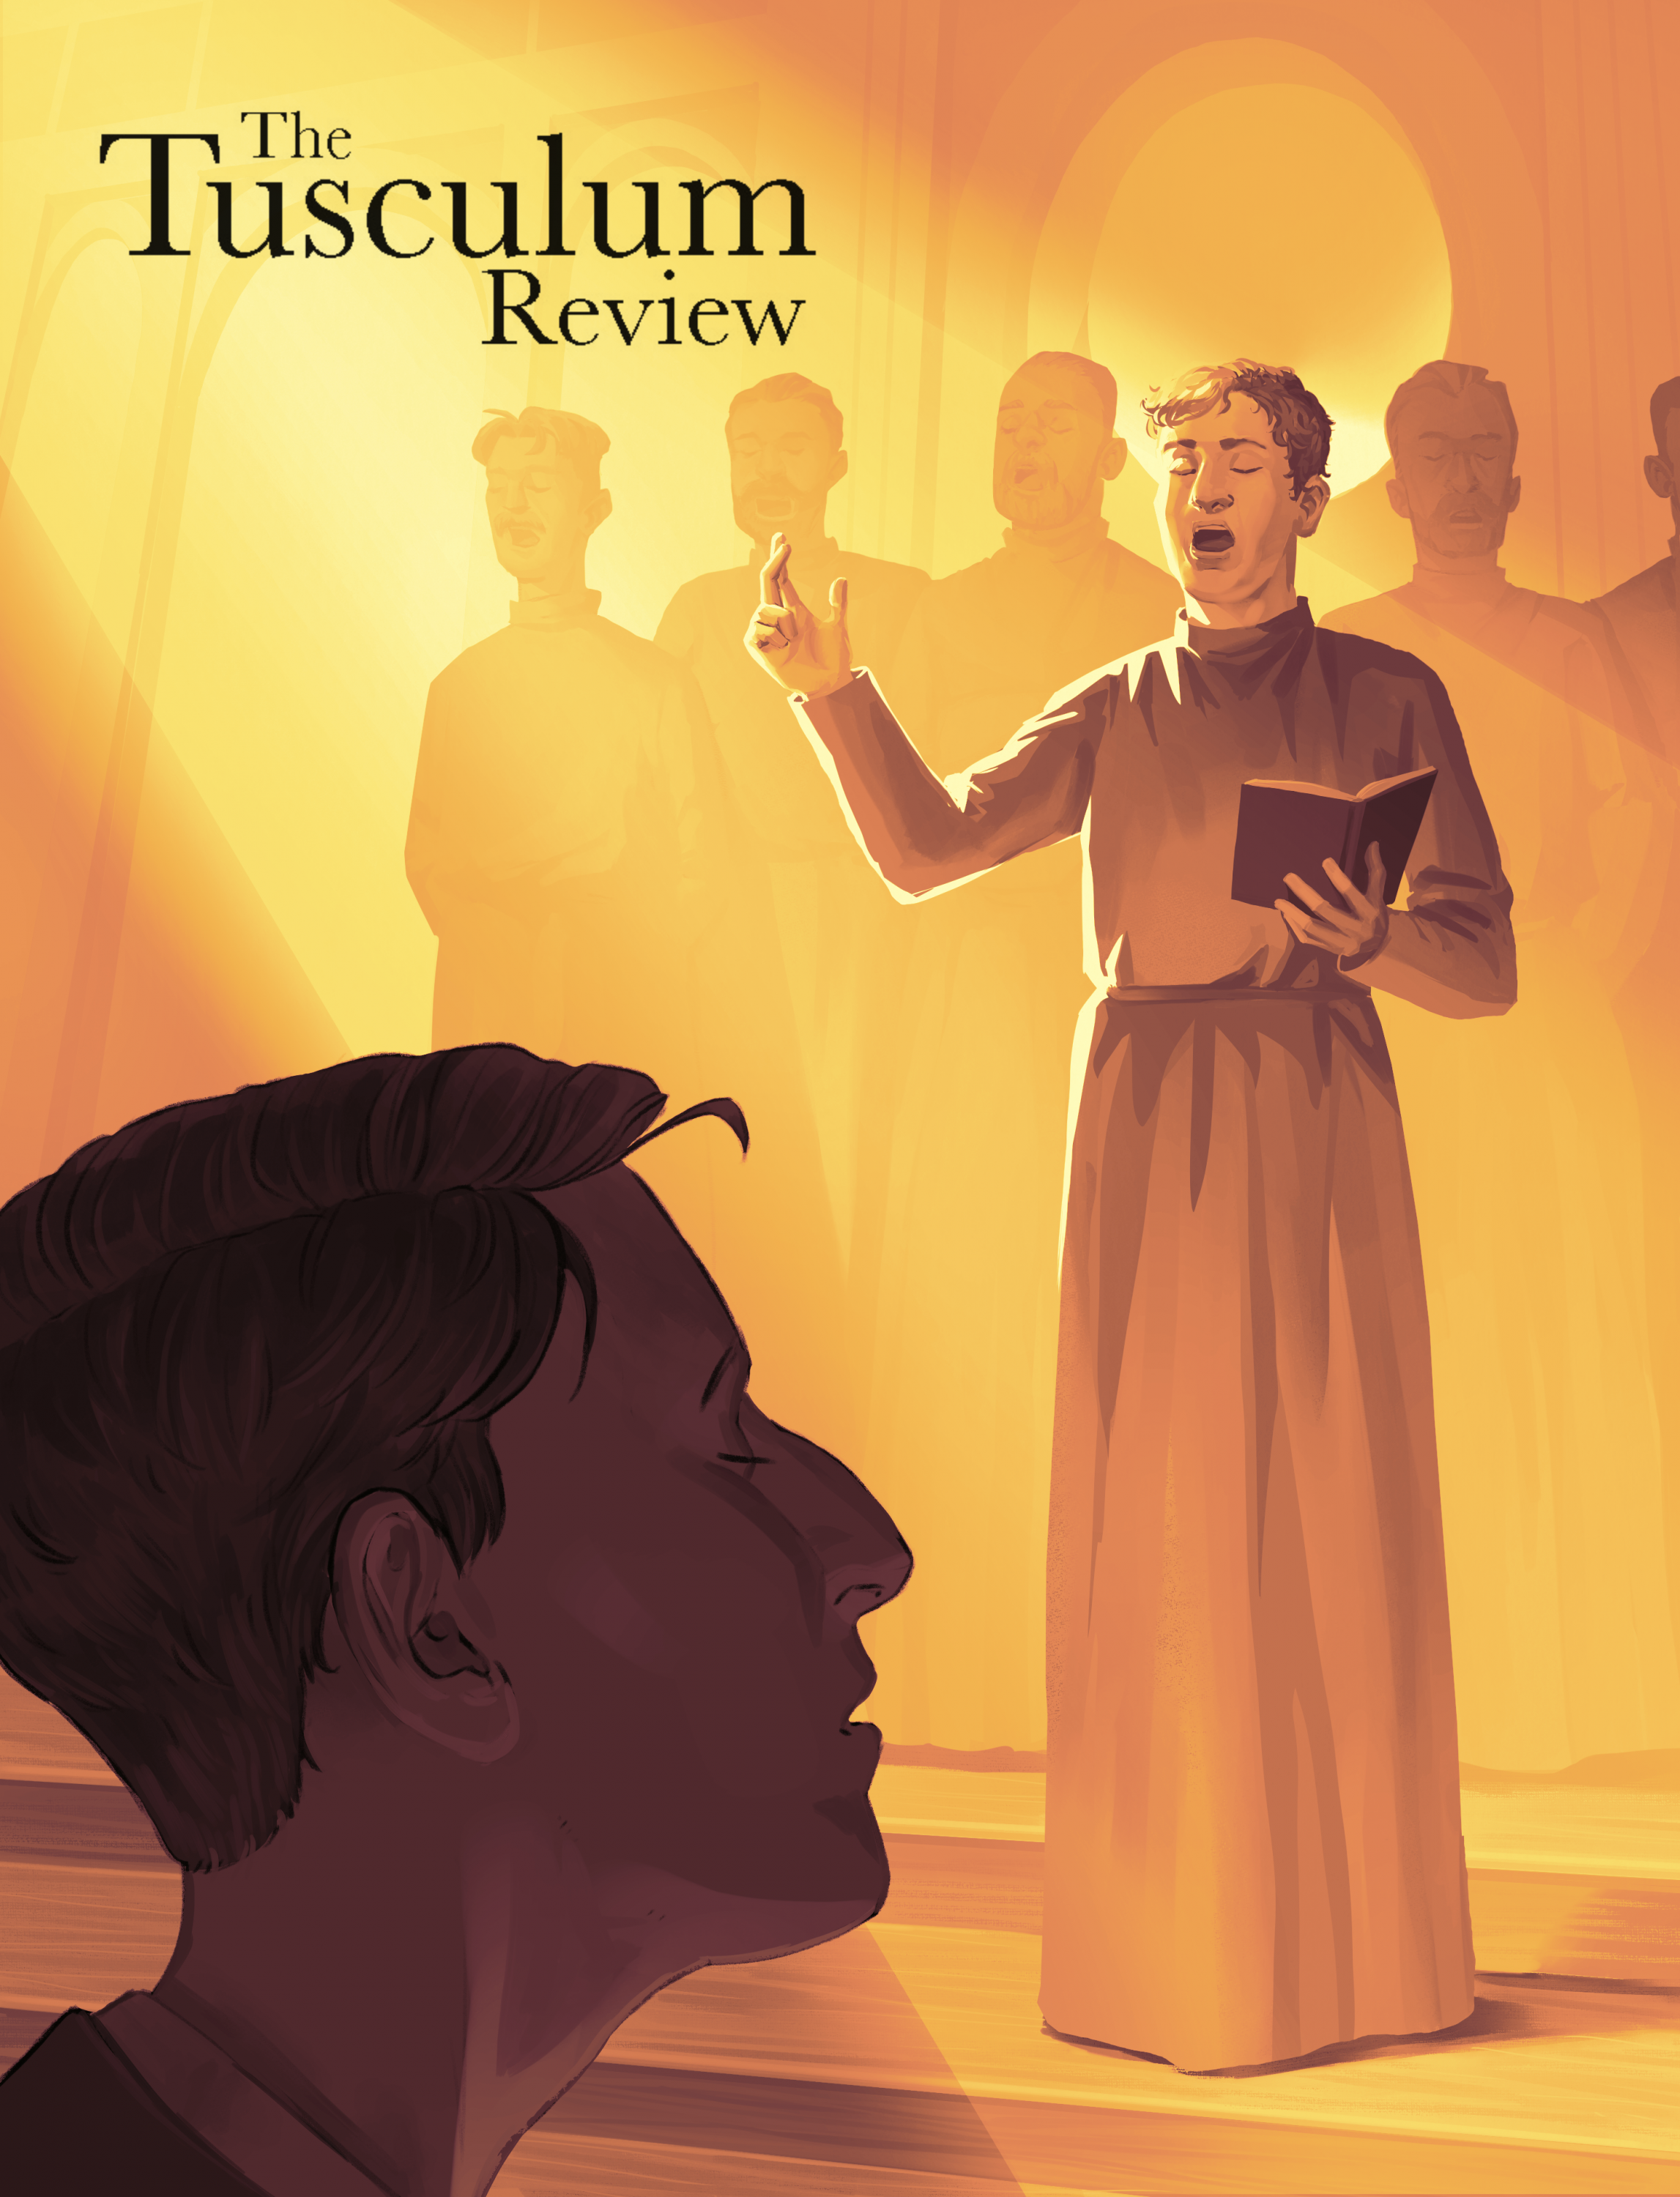 Cover of Volume 19 of The Tusculum Review, Man listening to male Orthodox choristers